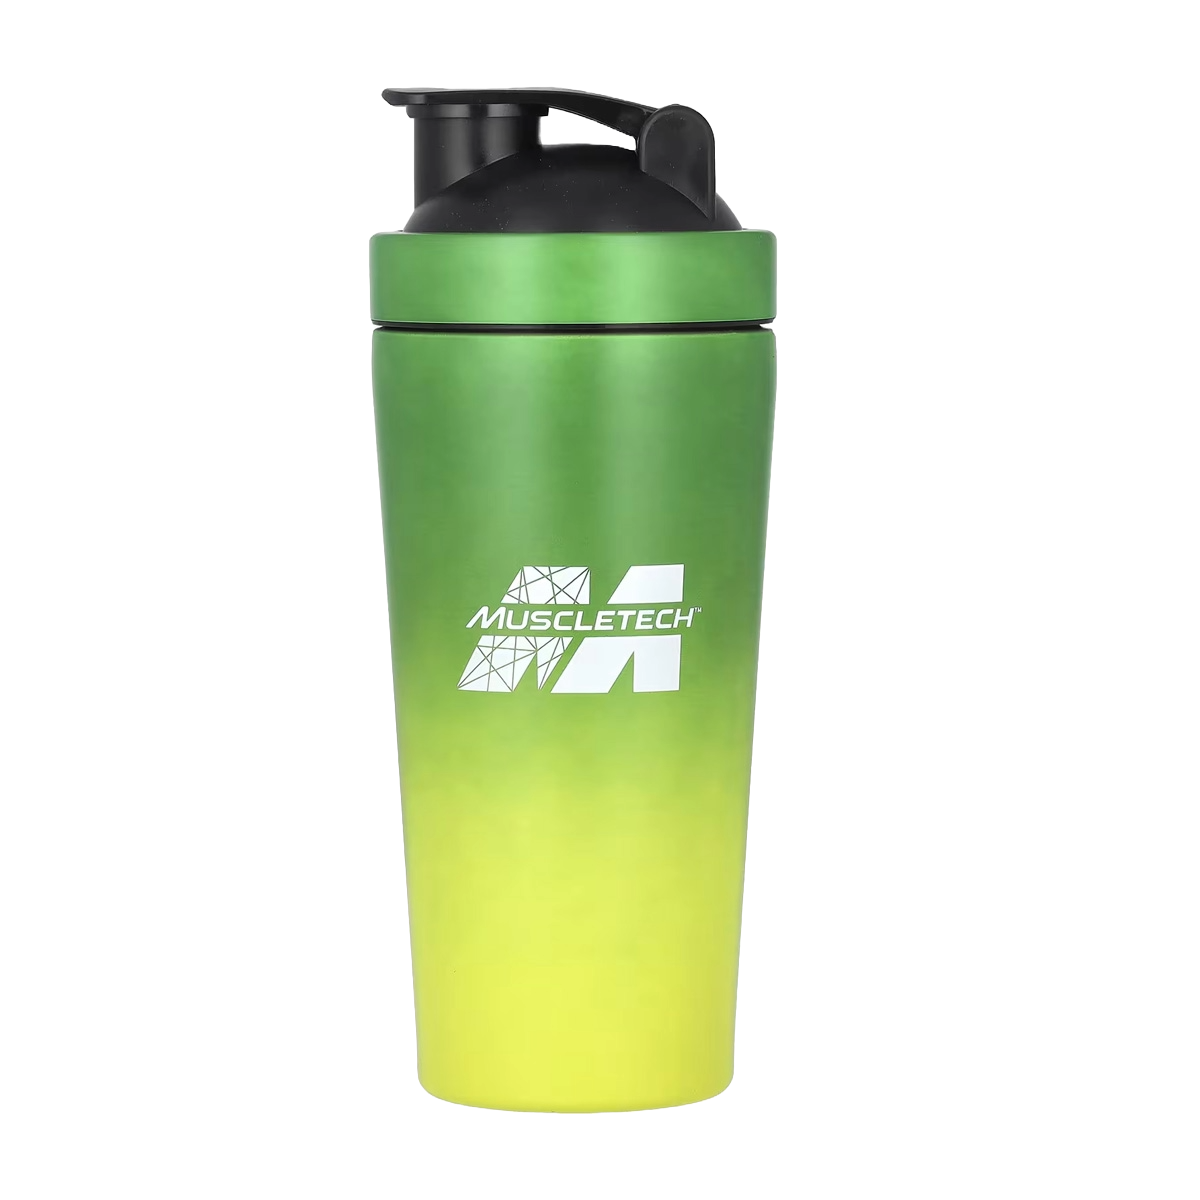 MuscleTech Stainless Steel Shaker Cup